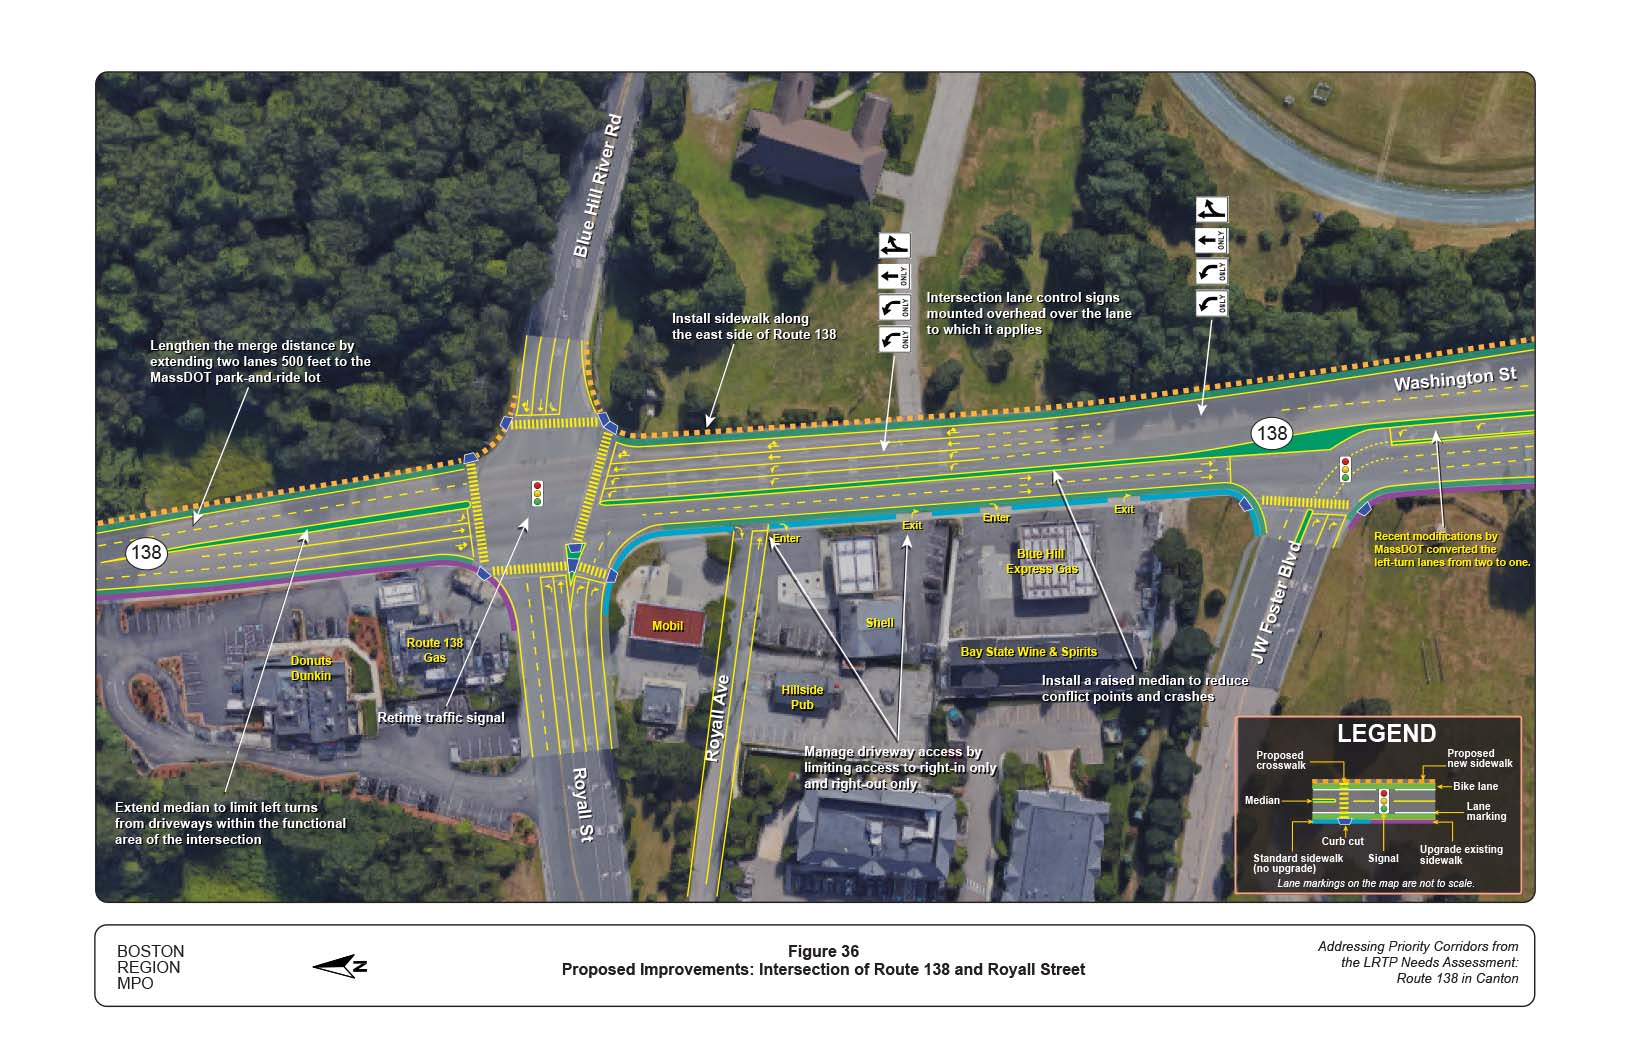 Figure 36 is map of the intersection of Route 138 and Royall Street with overlays showing the proposed improvements to the roadway.